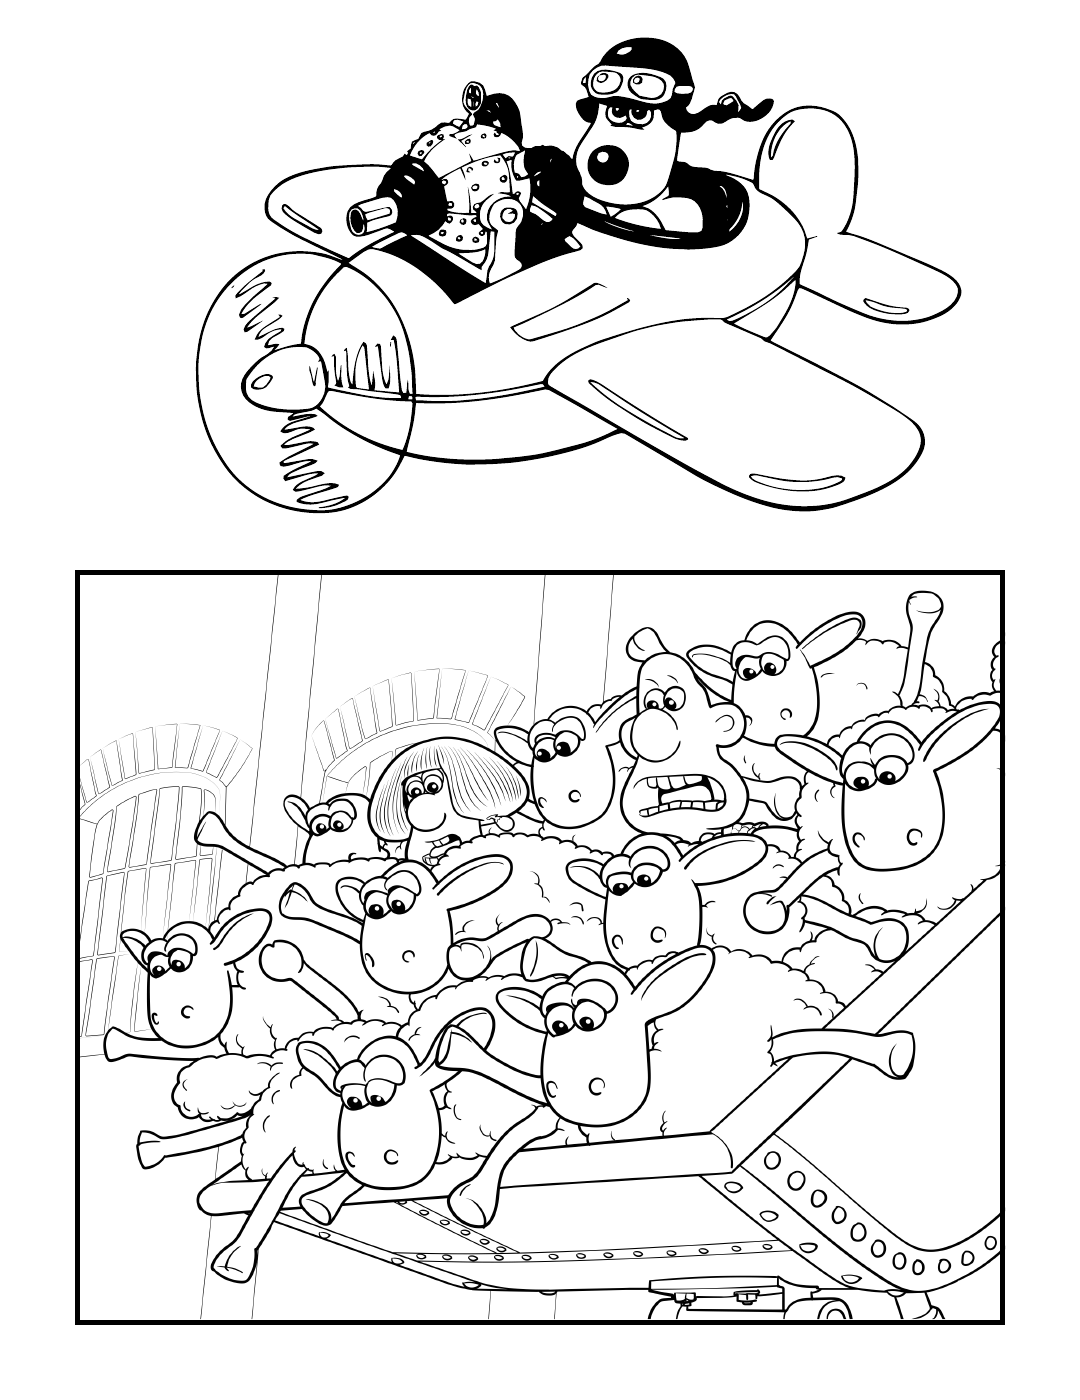 wallace gromit coloring pages